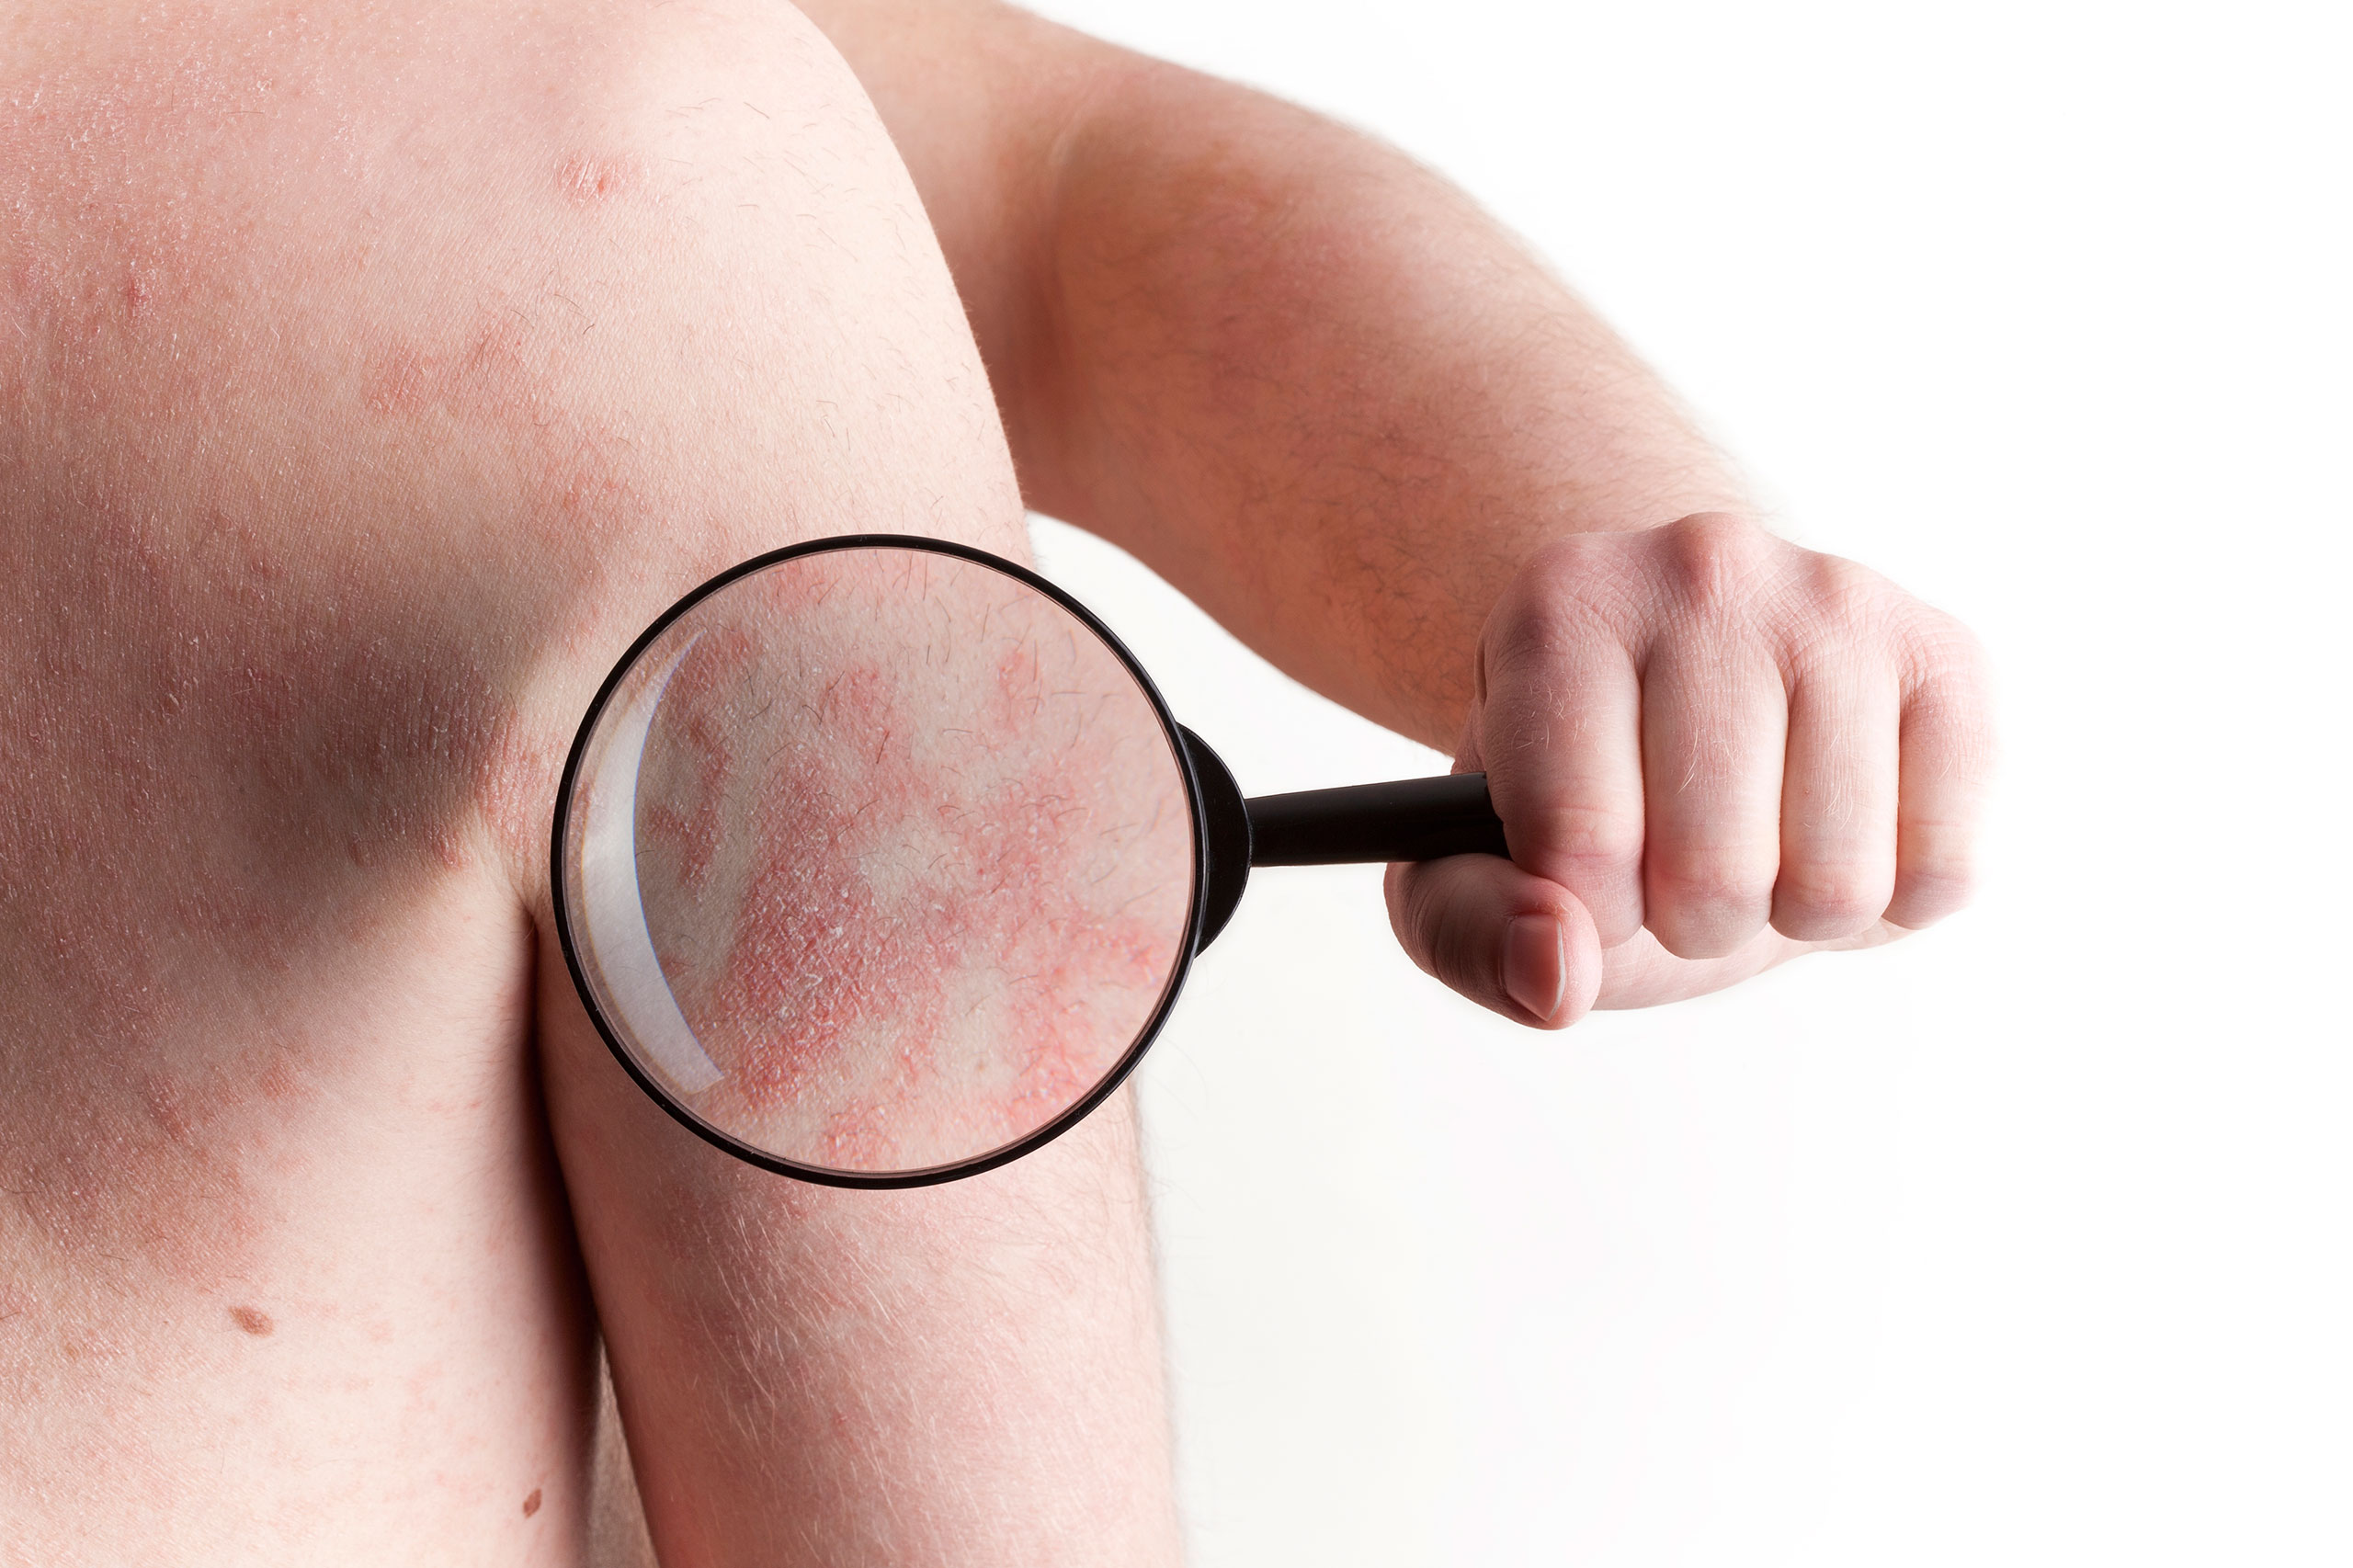 magnifying glass showing the impact of eczema and psoriasis